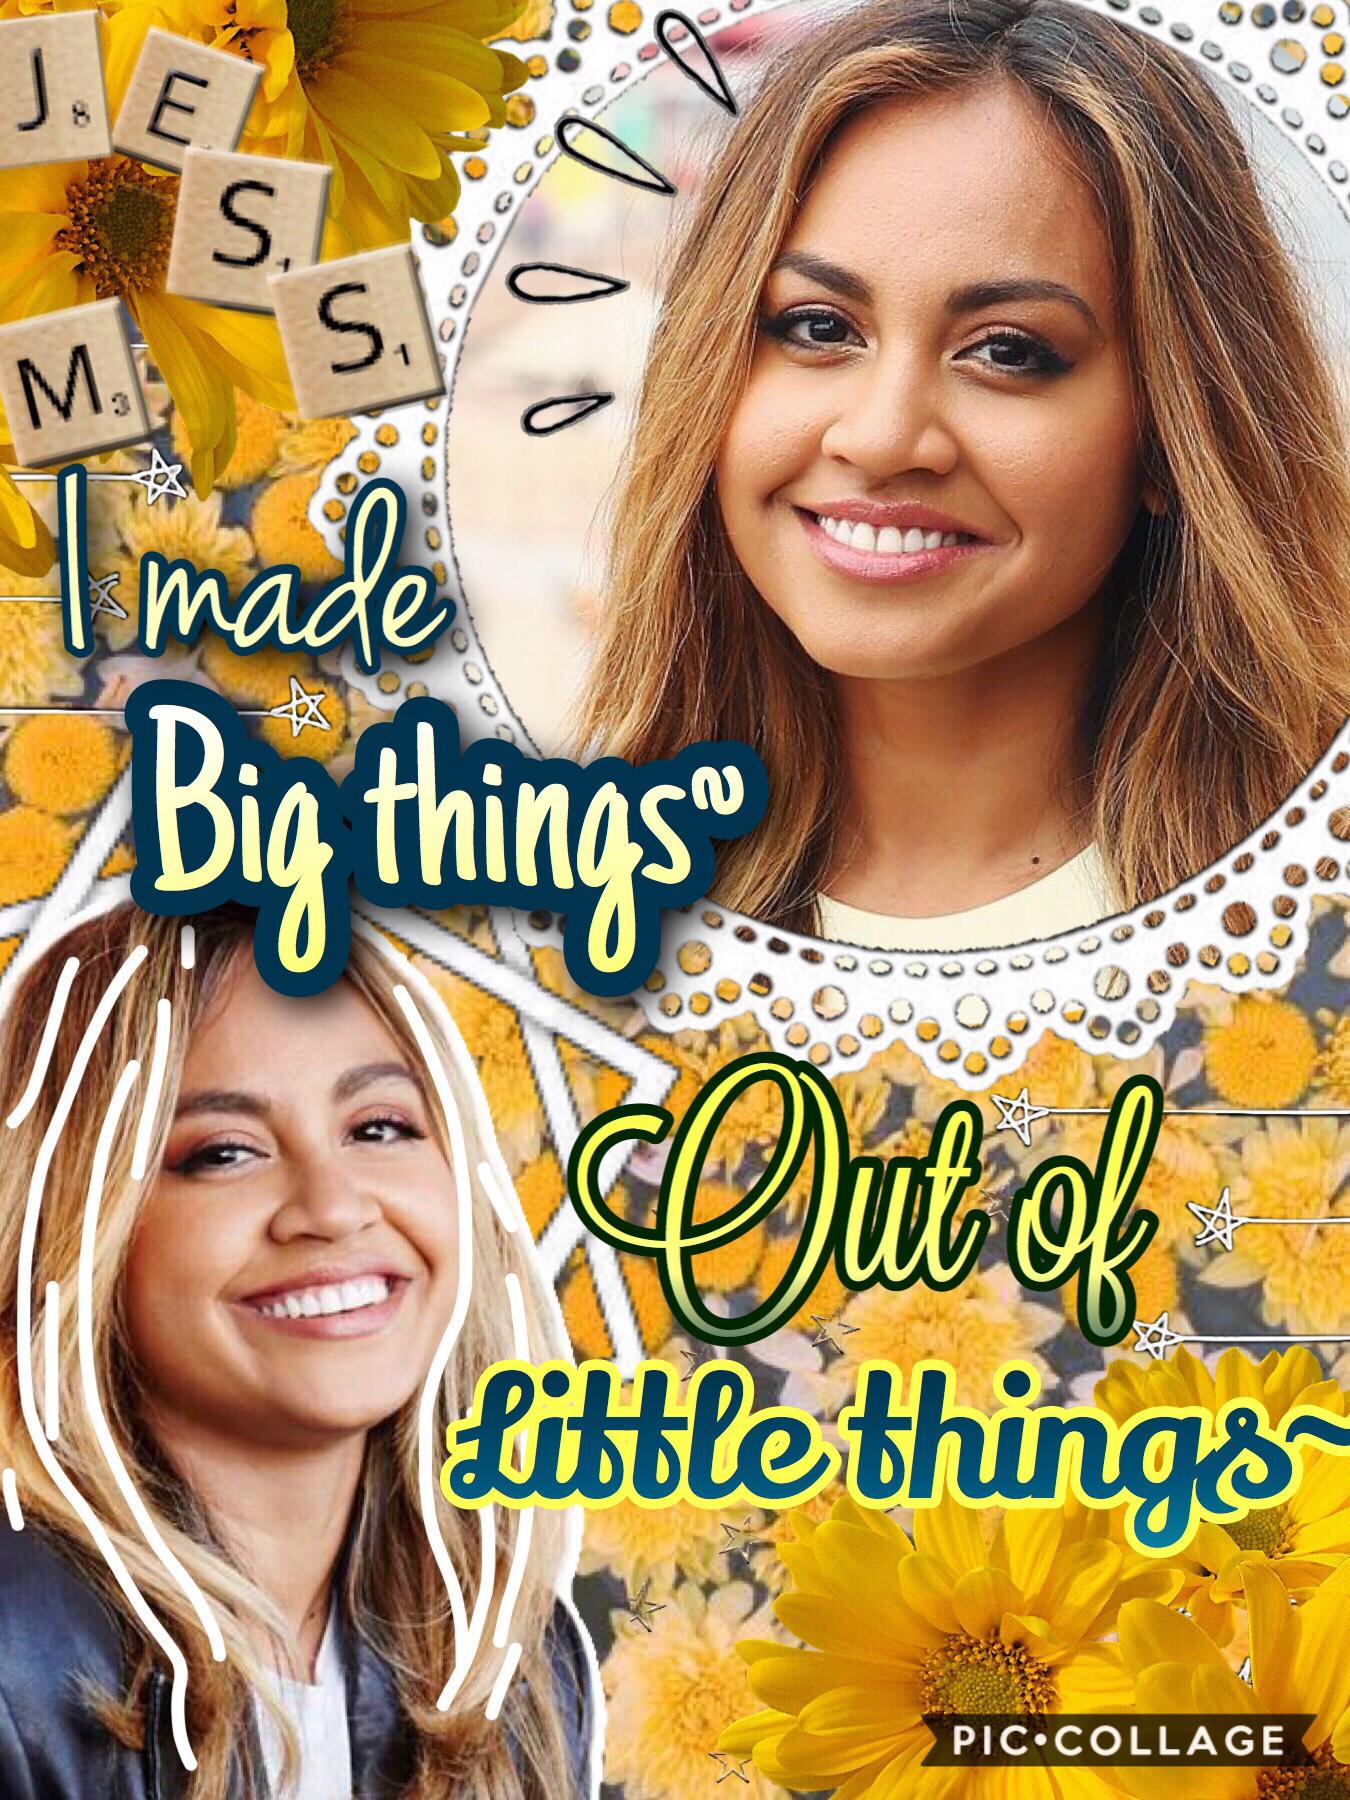 Ahhh helloooo guys!! Heres another celeb themed collage since you guys liked them so much on my poll! Rate out of 10? I looove jessy so much!! Shes my favveee! Whats your fave song by Jess? Mines little things! 
⭐️Jessica Mauboy⭐️